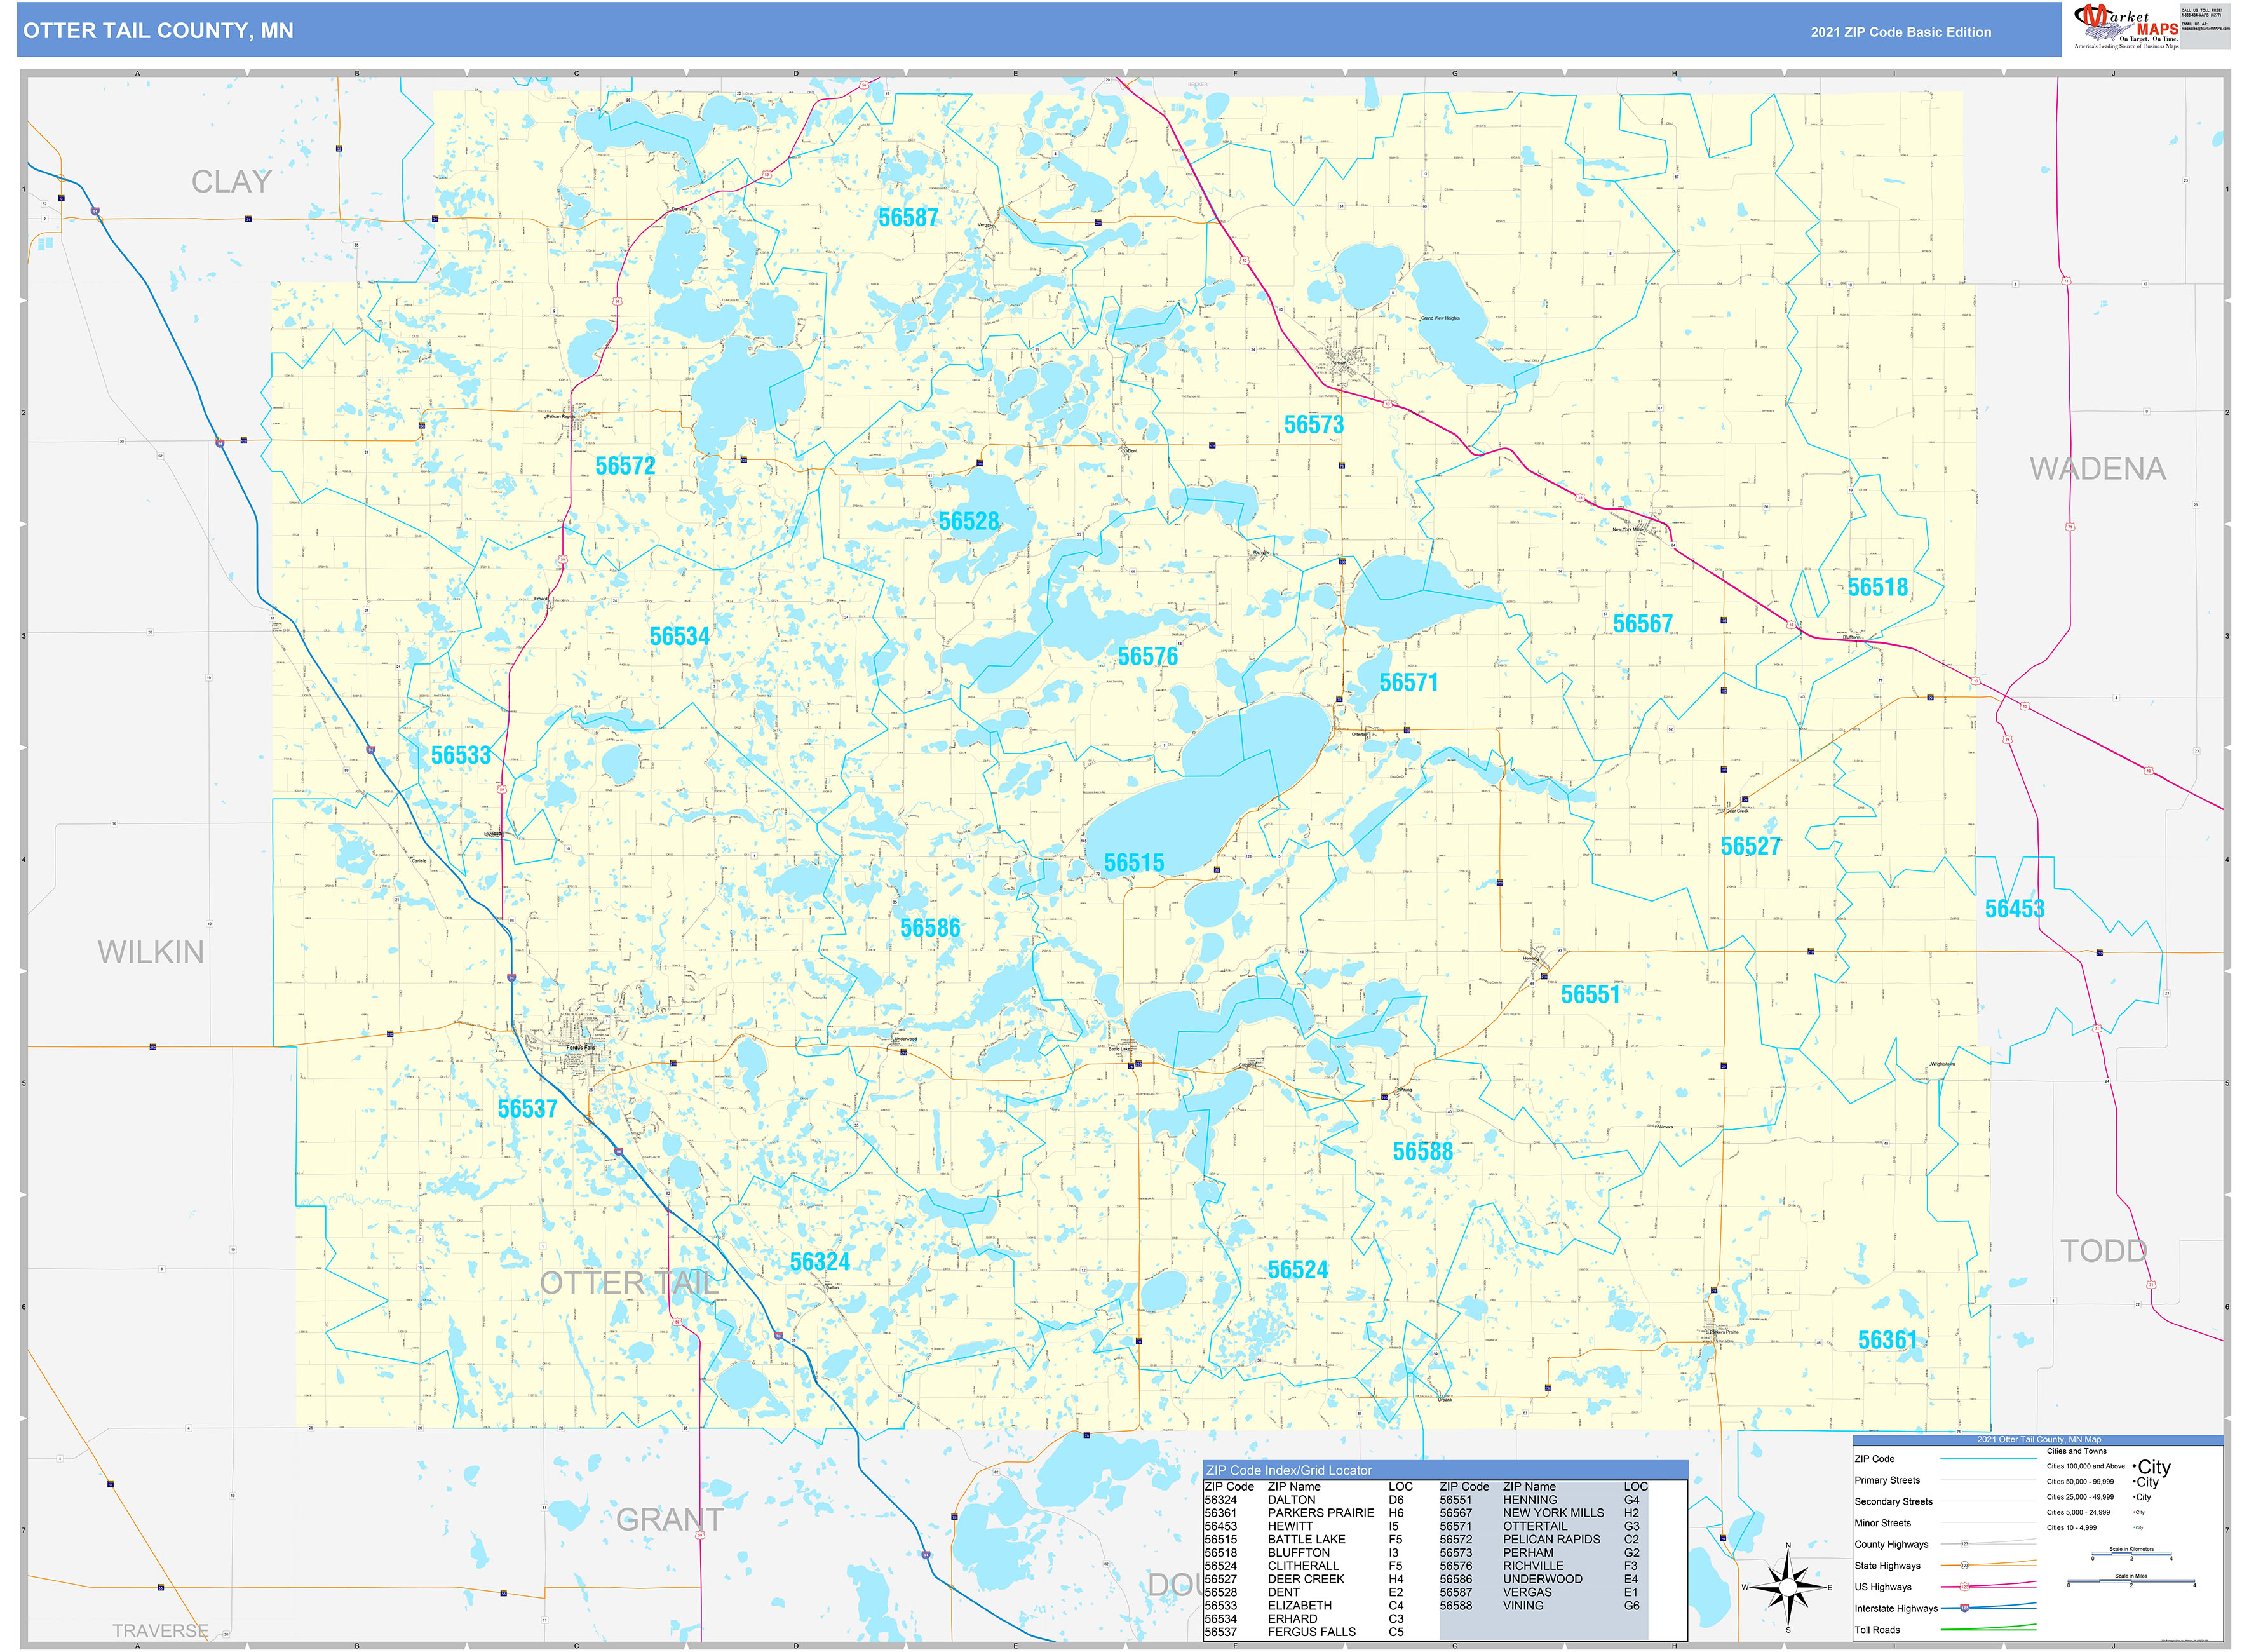 Otter Tail County, MN Zip Code Wall Map Basic Style by MarketMAPS